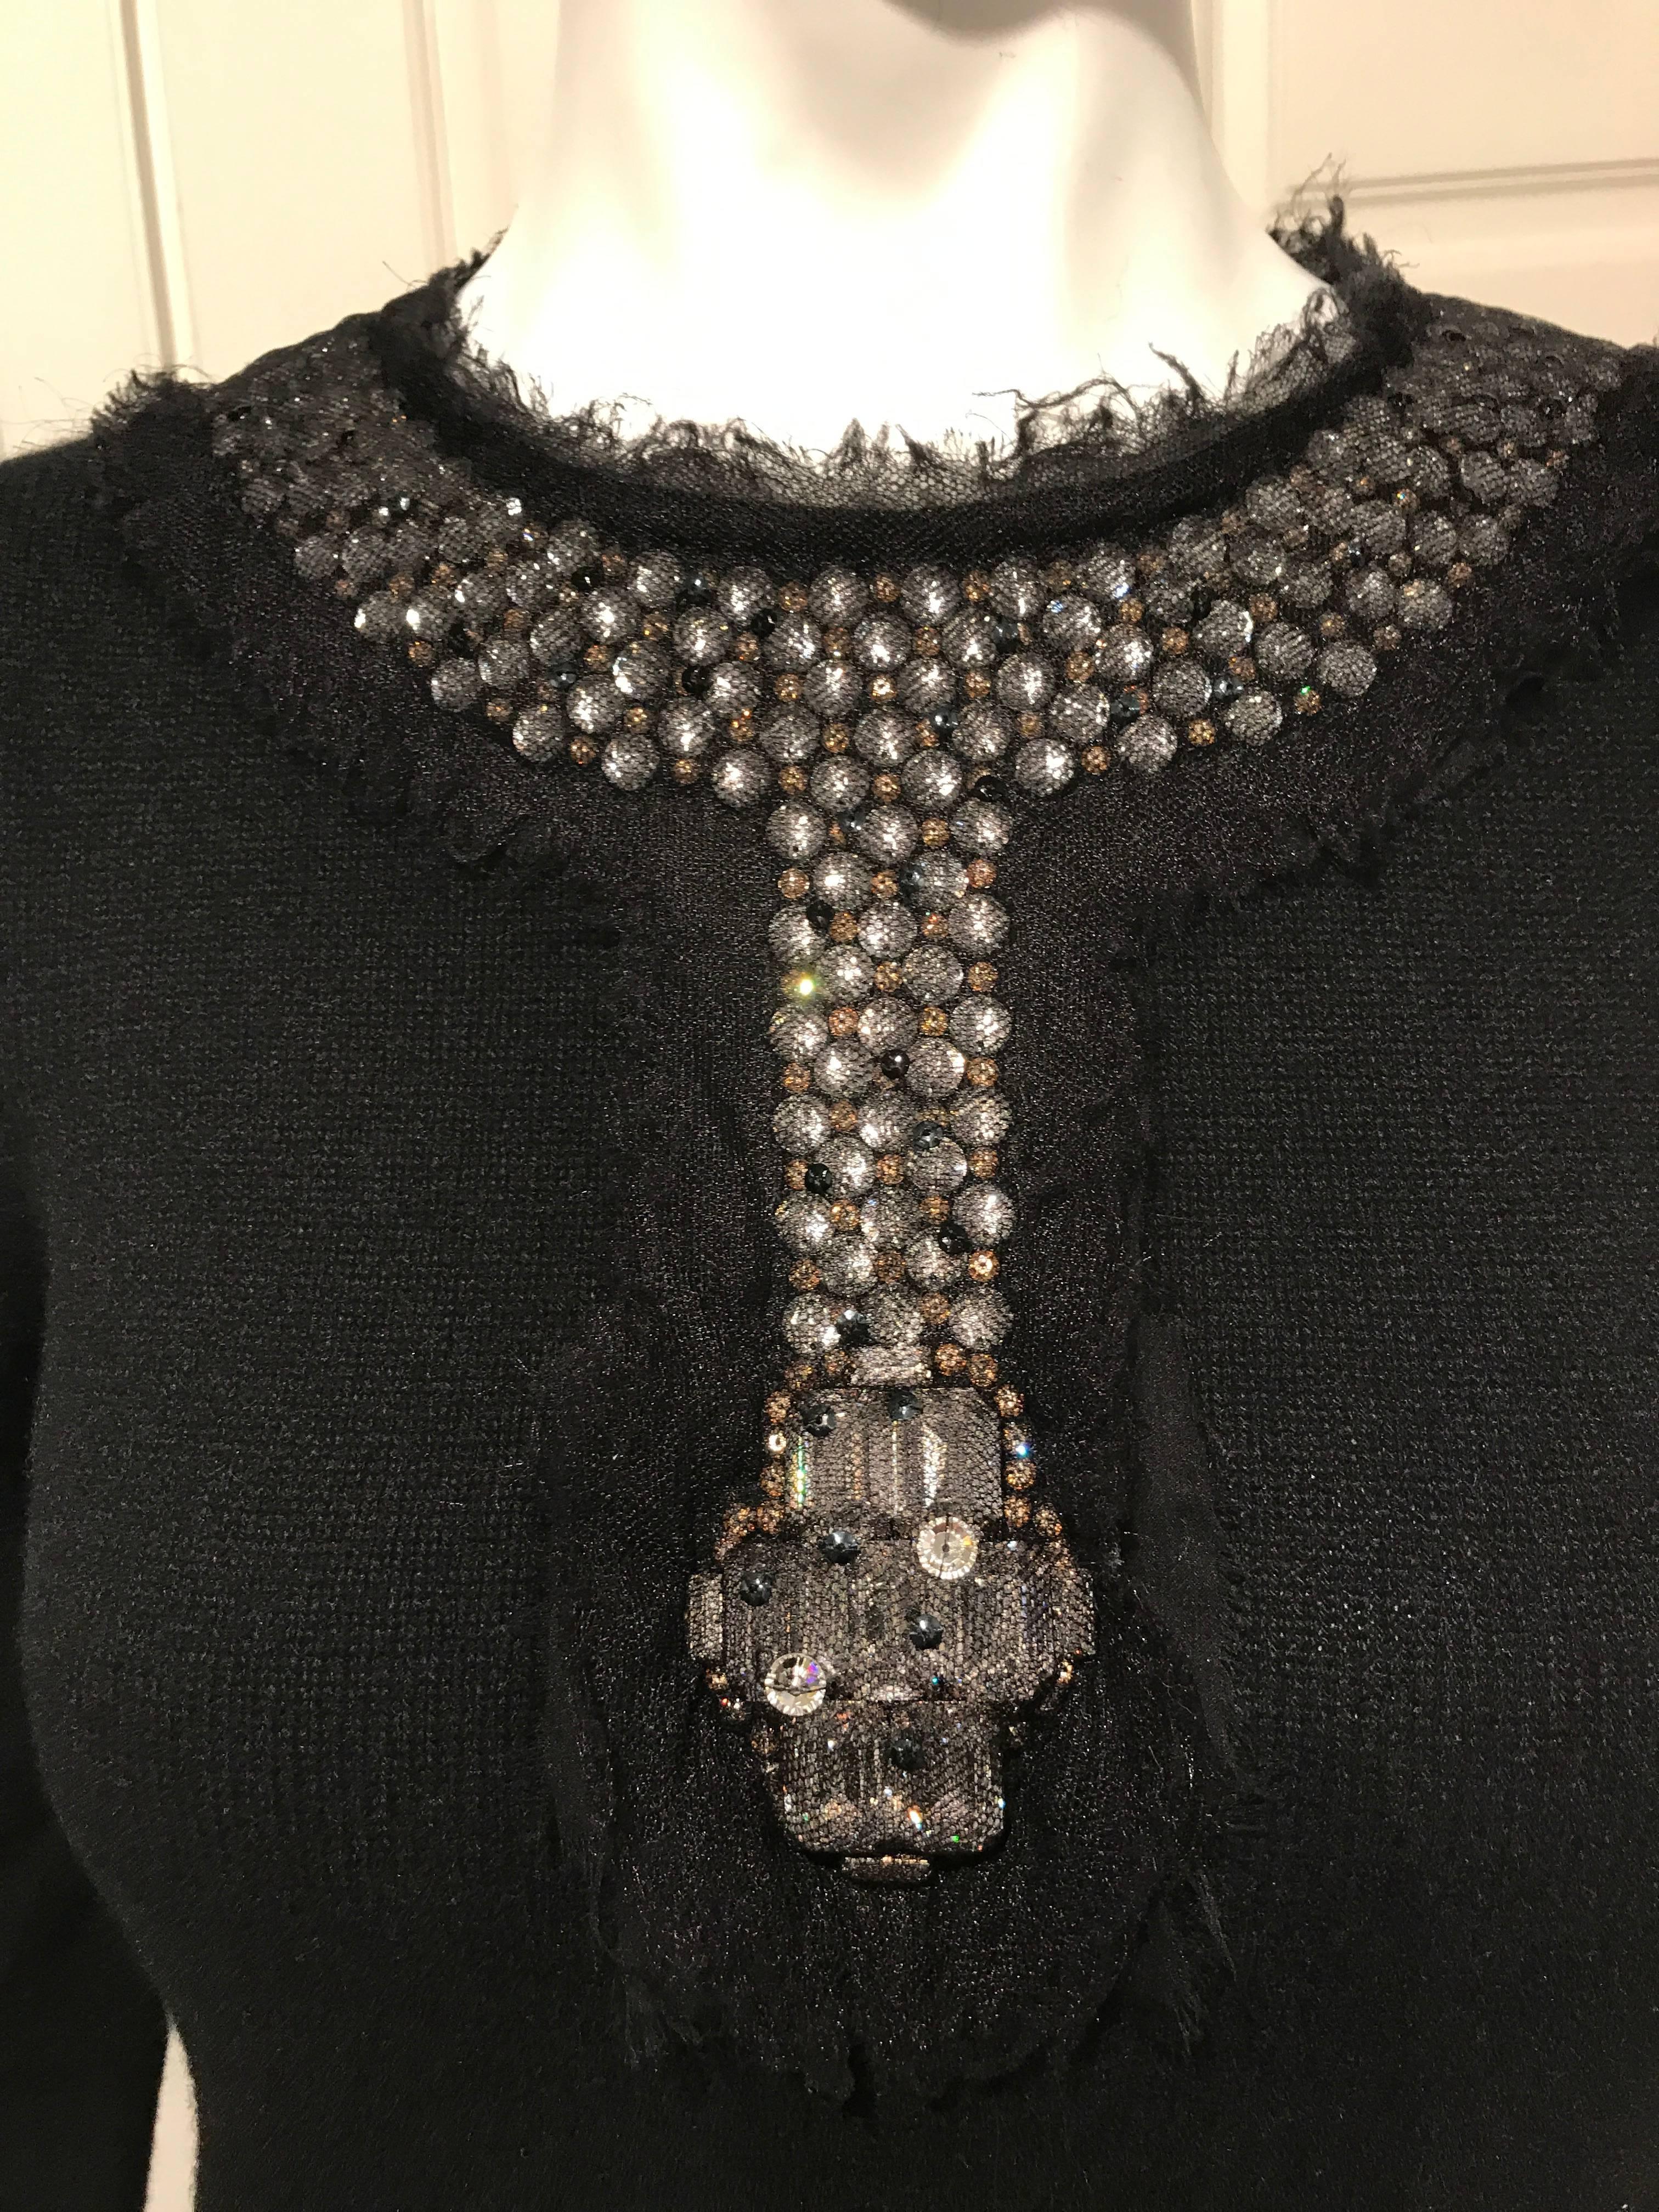 Chanel Black Cashmere Sweater With Jeweled Neckline Sz36 (Us4) For Sale 1